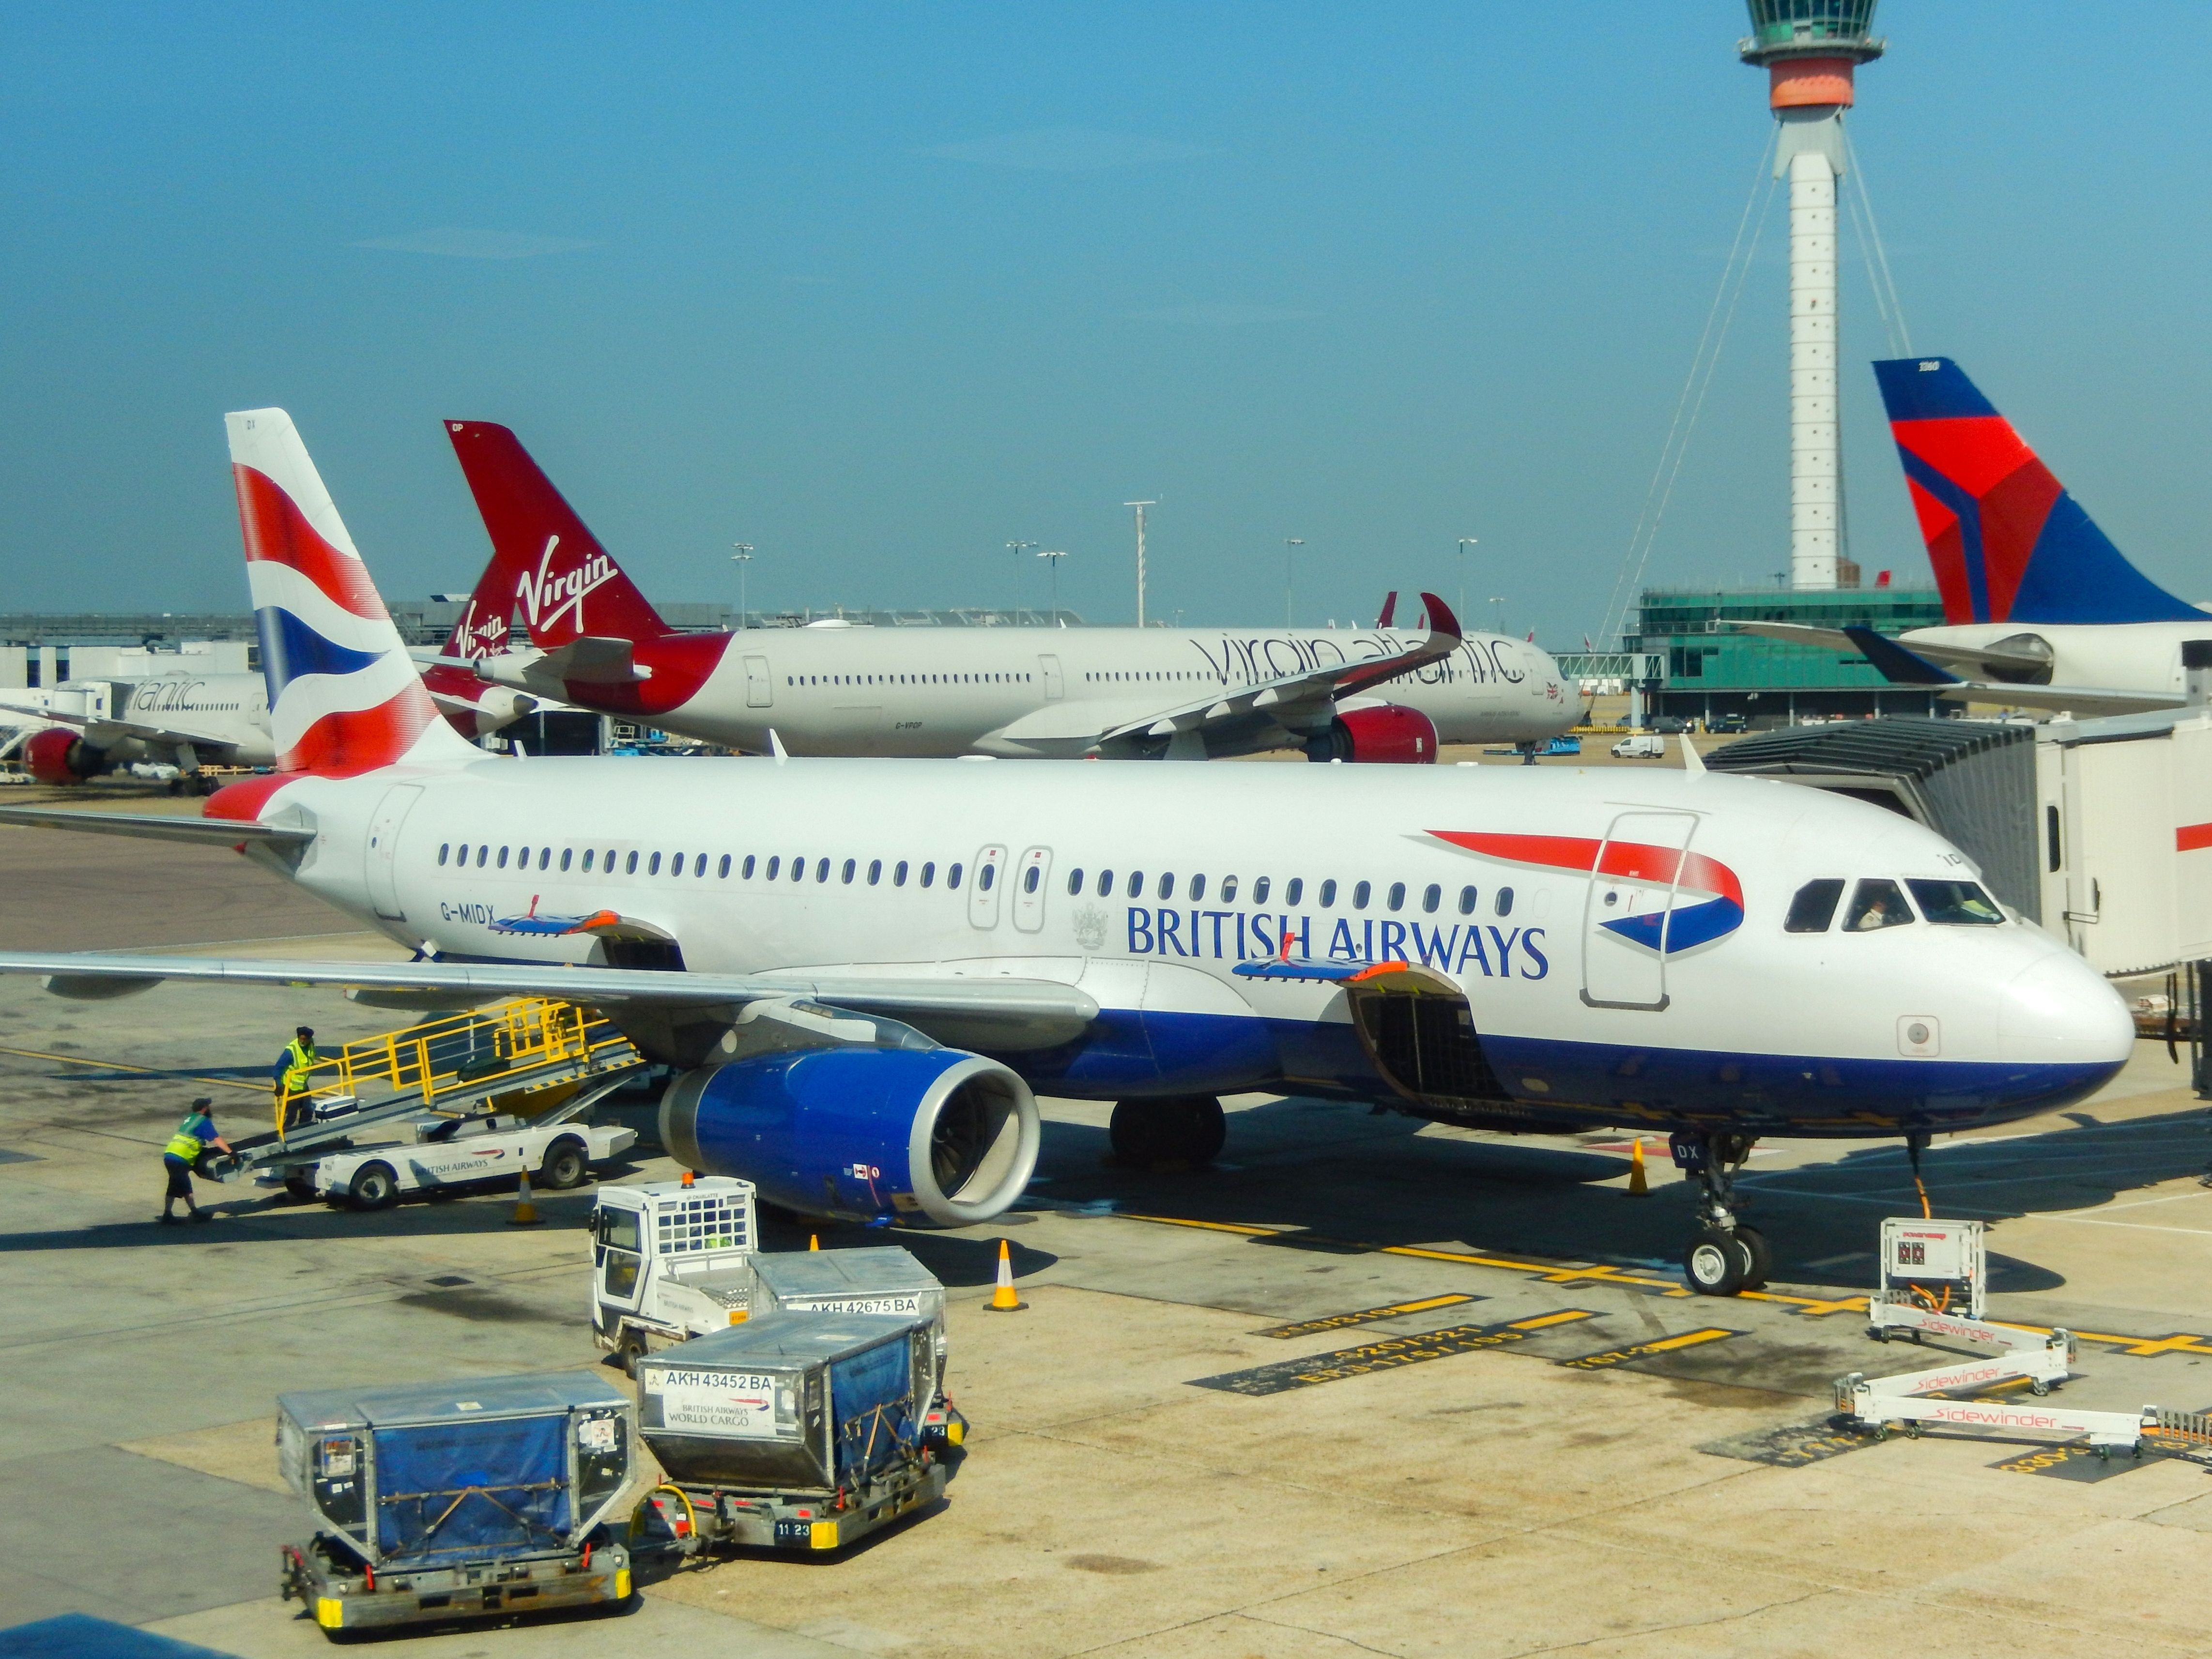 British Airways Airbus A320 (registration G-MIDX) at the terminal in Heathrow Airport